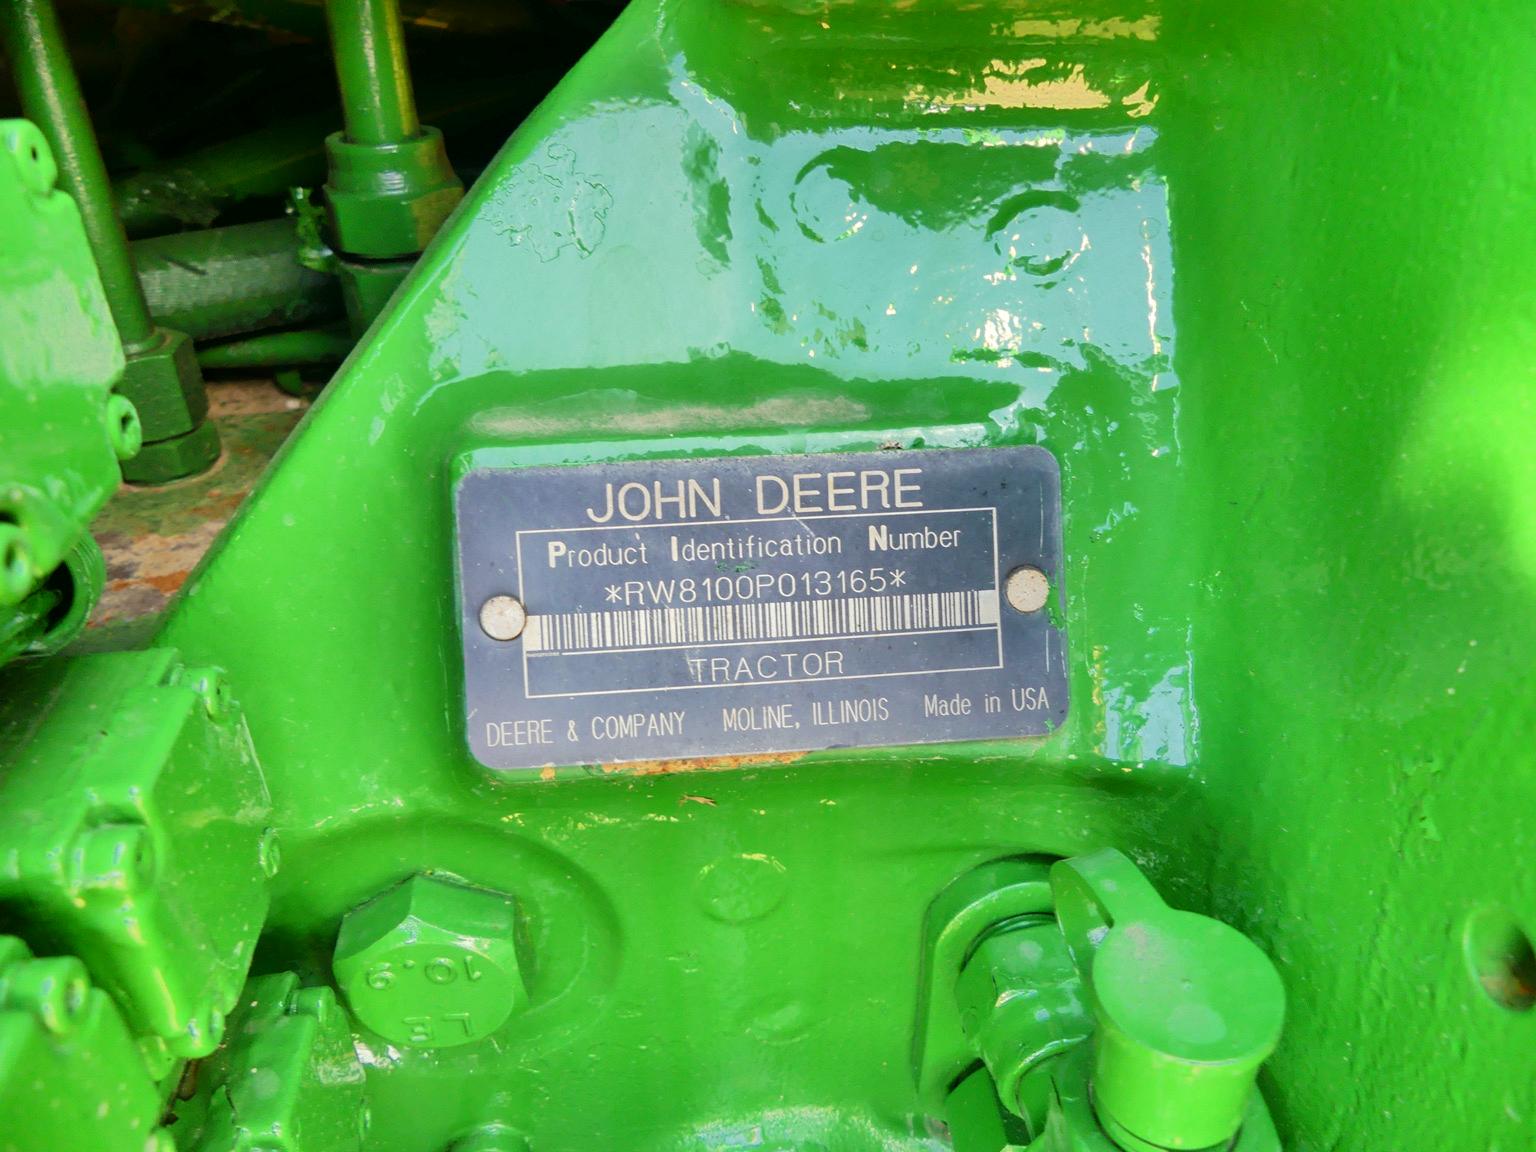 John Deere 8100 MFWD Tractor, s/n RW8100P013165: C/A, Trans. Issue